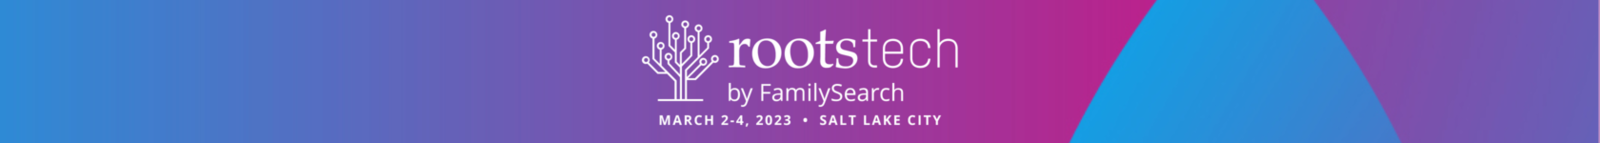 RootsTech 2023  logo